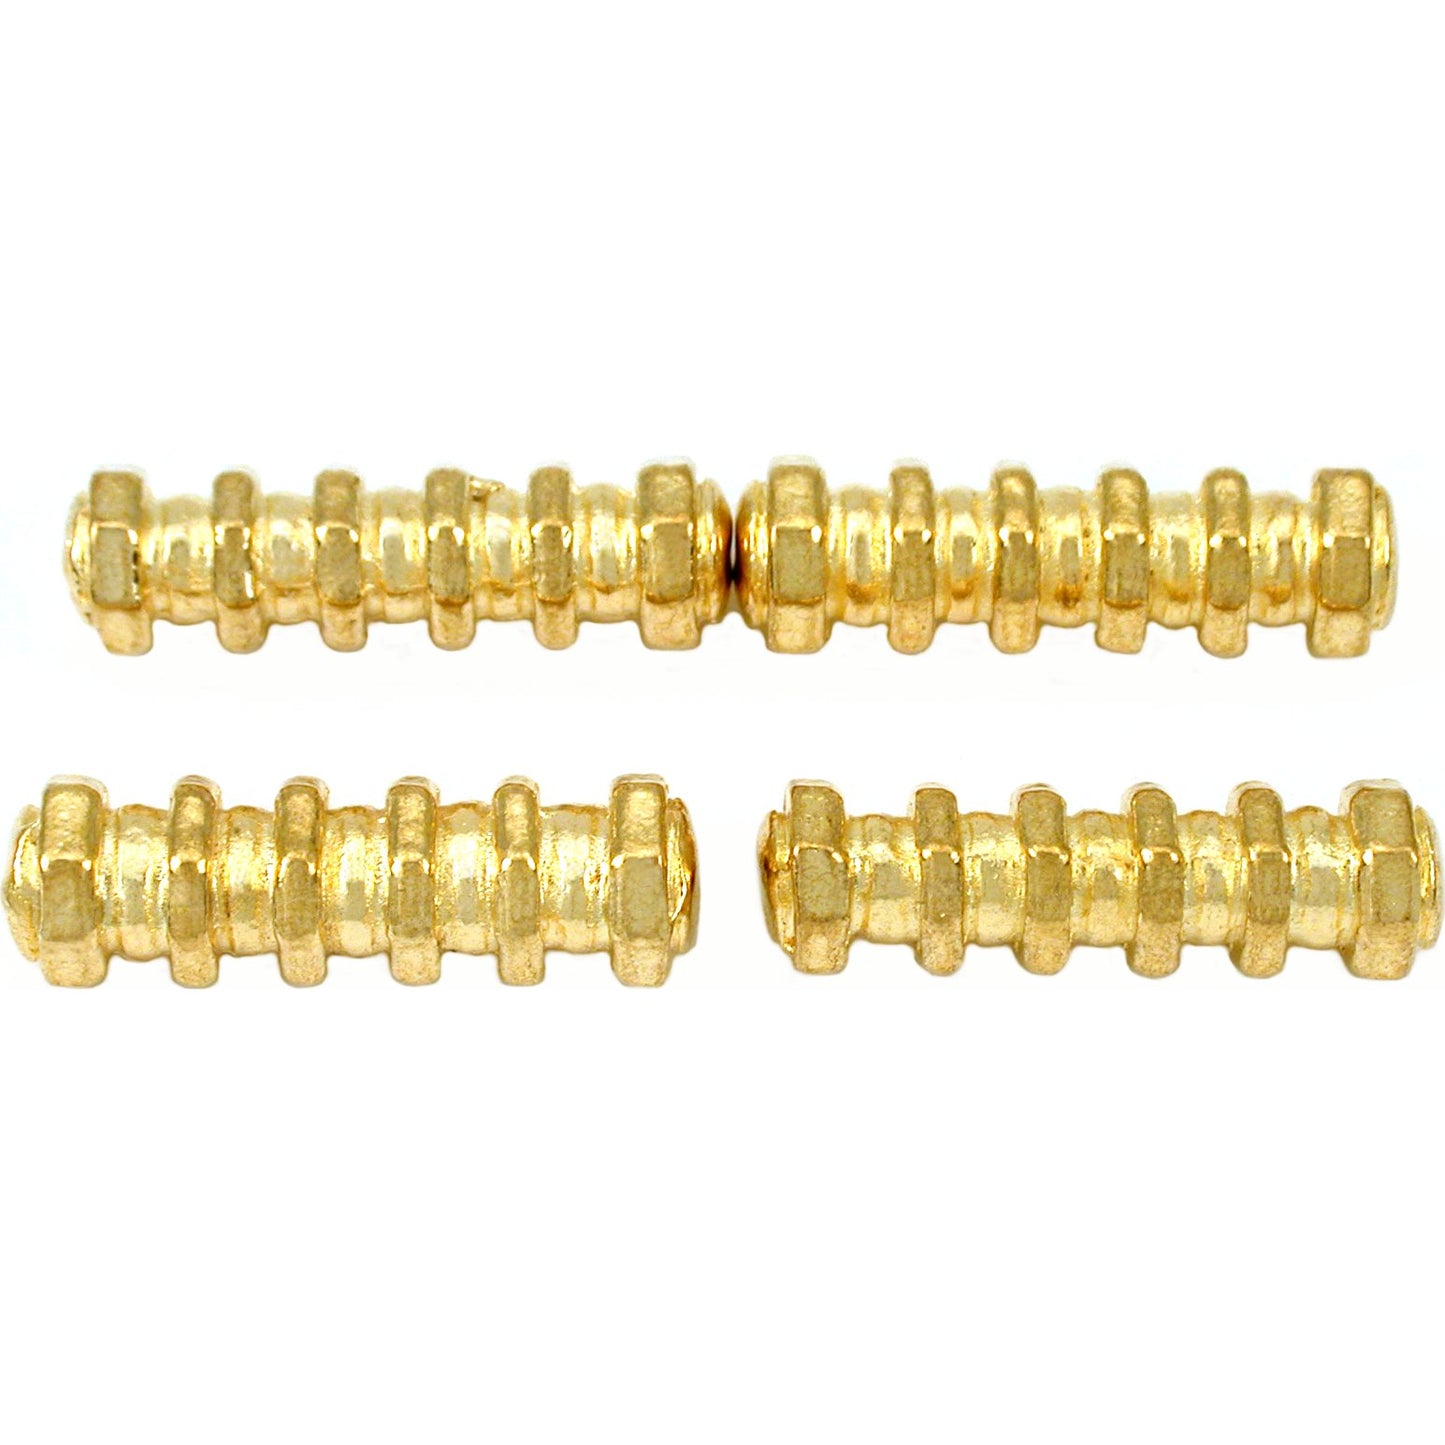 Bali Octagon Tube Gold Plated Beads 23mm 15 Grams 4Pcs Approx.